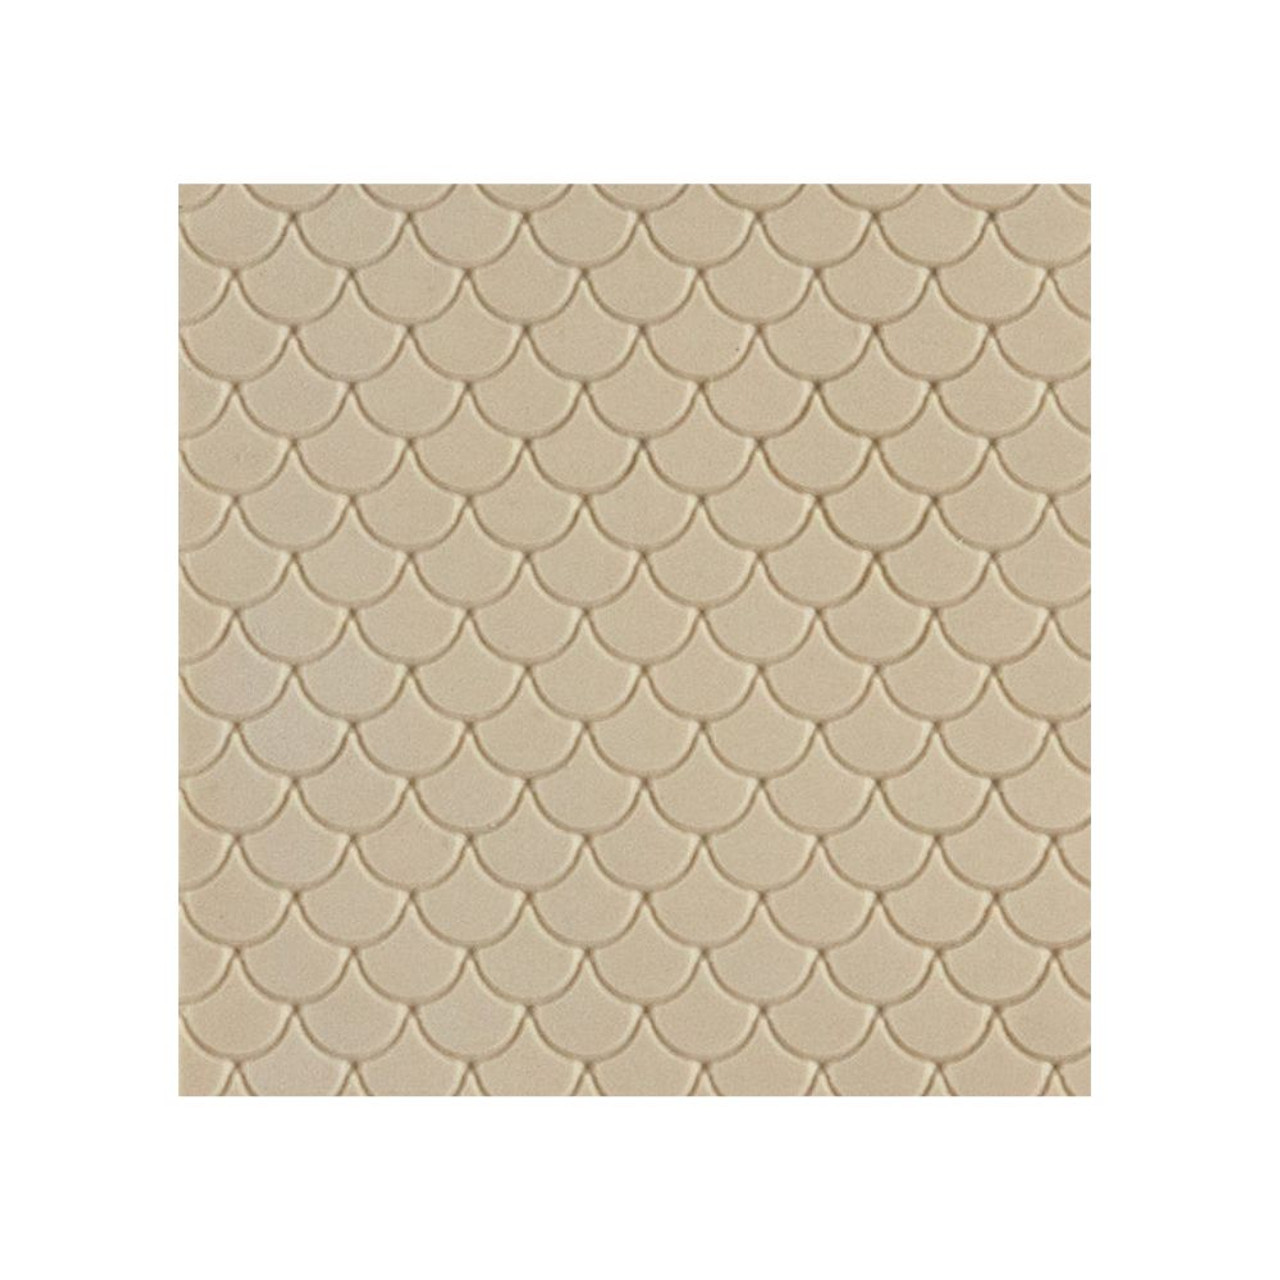 Texture Tile - Scales Embossed